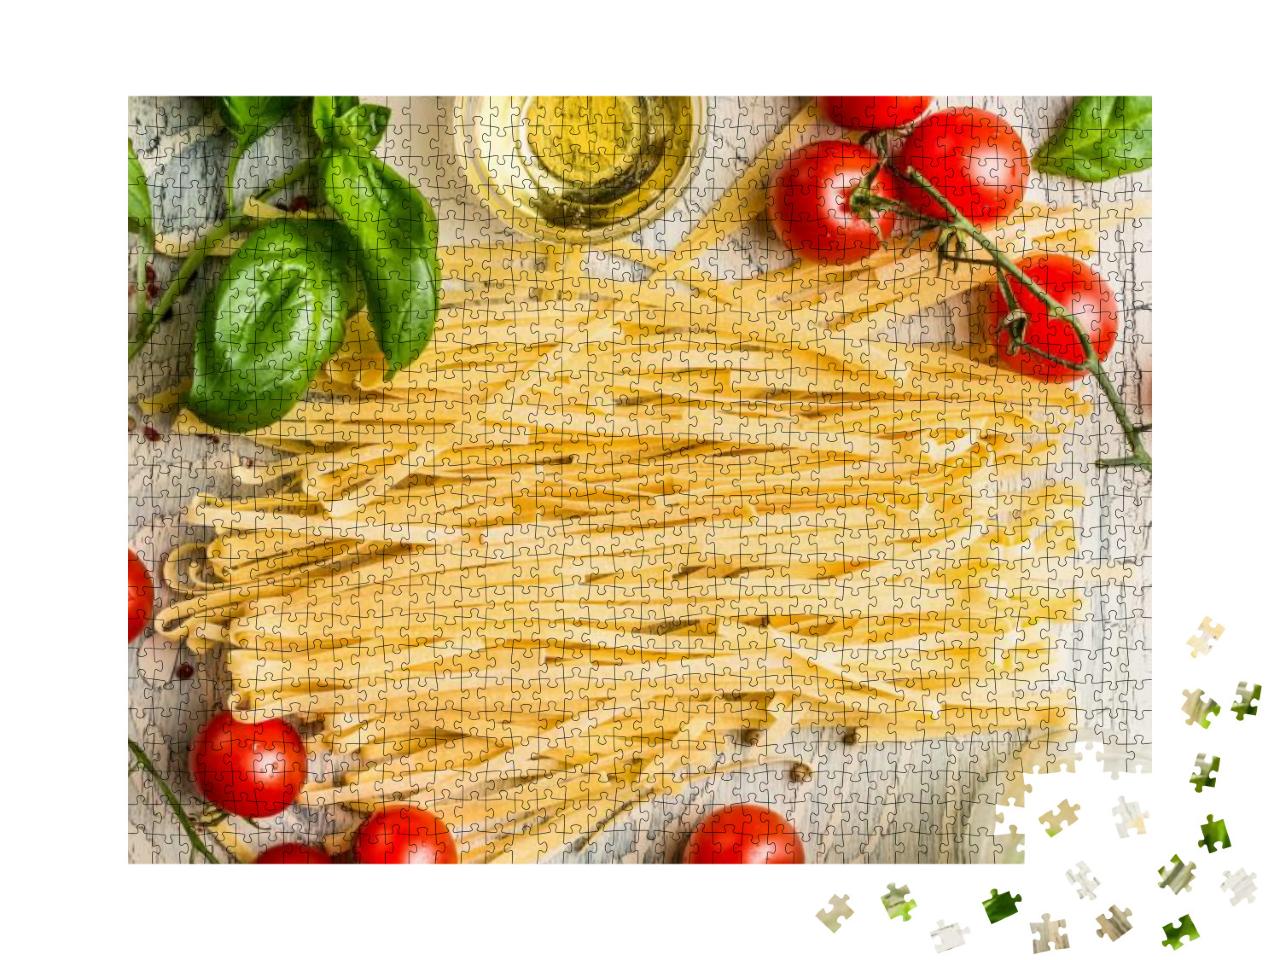 Italian Pasta with Tomatoes, Basil & Oil, Top View... Jigsaw Puzzle with 1000 pieces